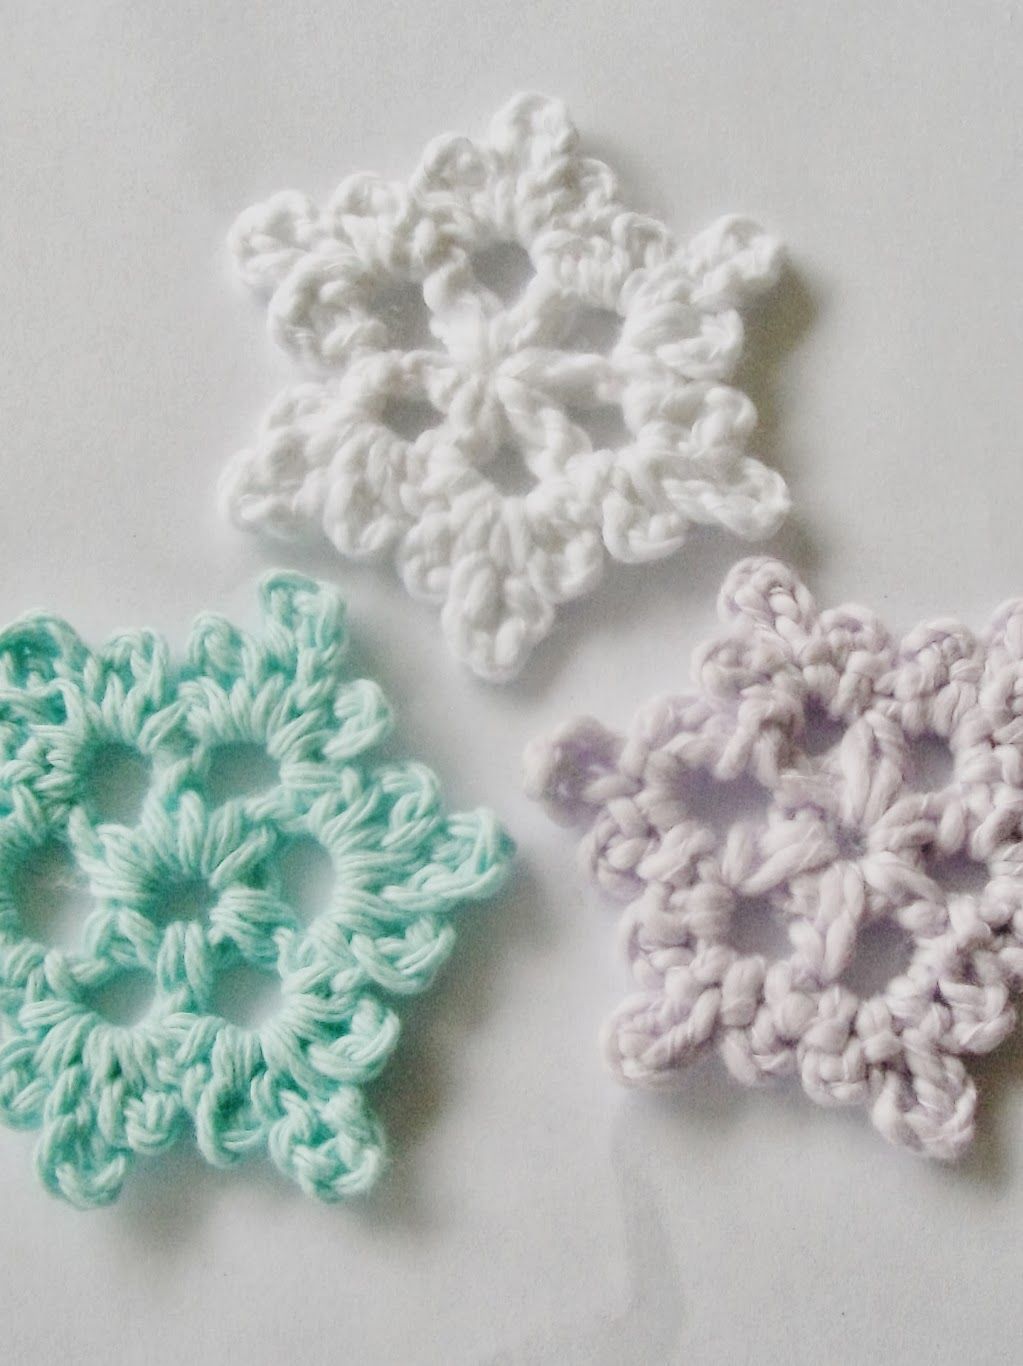 Crochet Patterns For Beginners | DIY Projects For Beginners -   18 holiday DIY snowflake pattern ideas